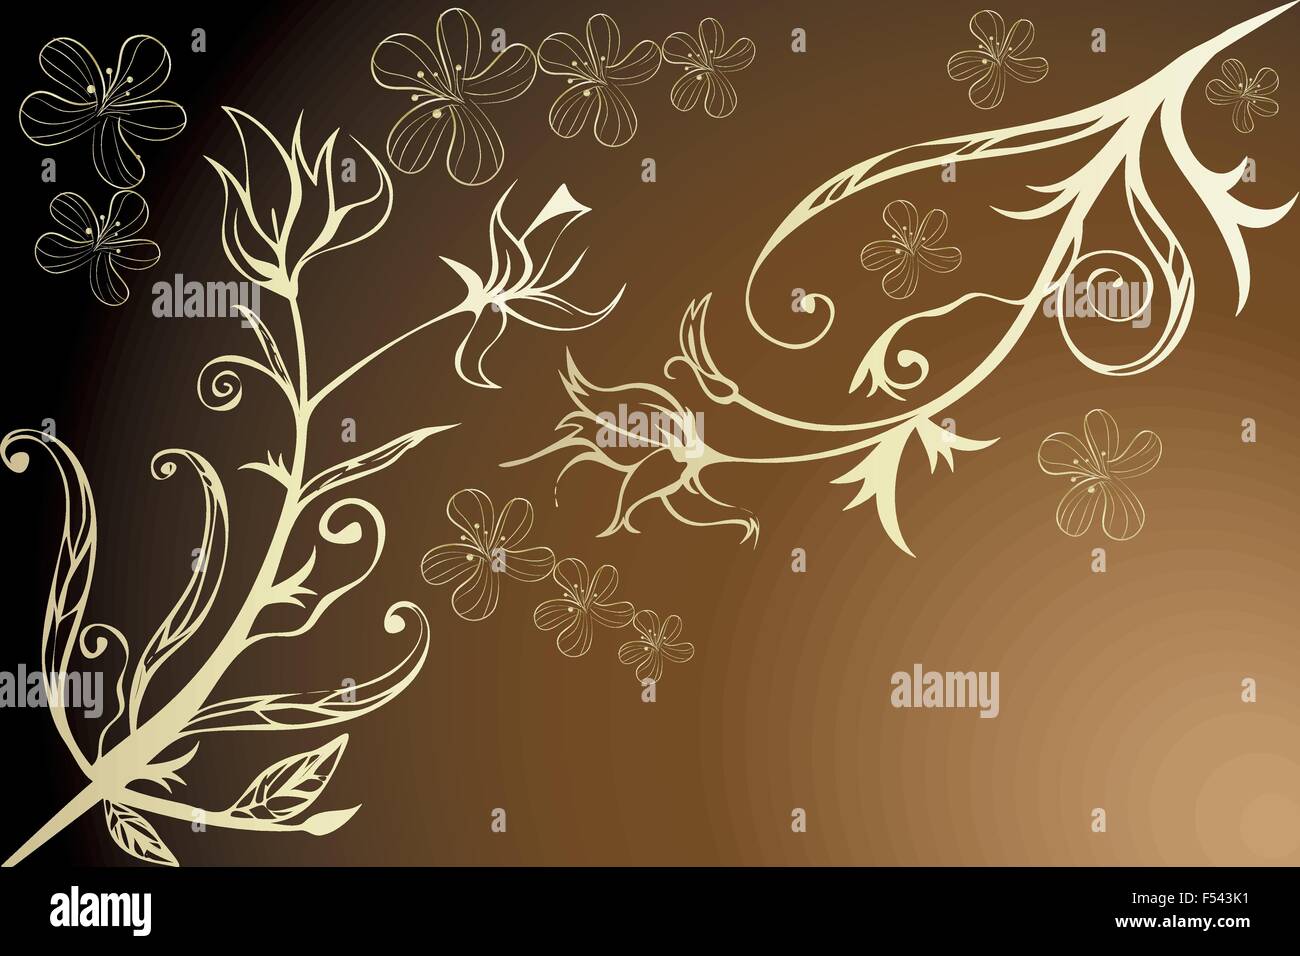 Golden floral design - Illustration with room for text Stock Vector